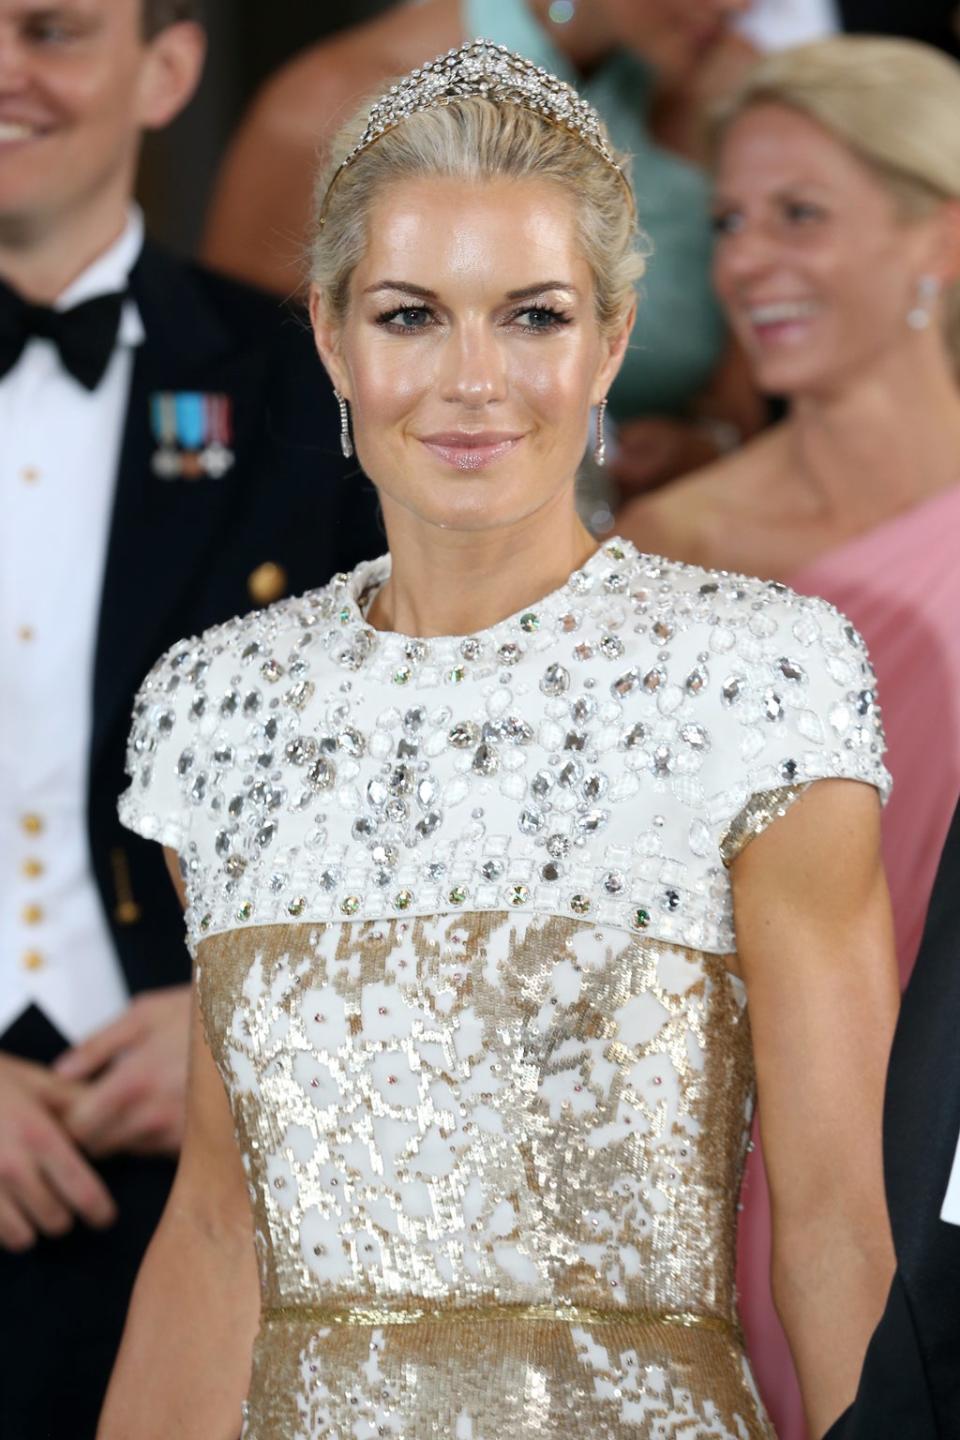 Businesswoman Celina Midelfart at the wedding of Princess Madeleine of Sweden and Christopher O’Neill hosted by King Carl Gustaf XIV and Queen Silvia on 8 June 2013 in Stockholm, Sweden (Getty Images)